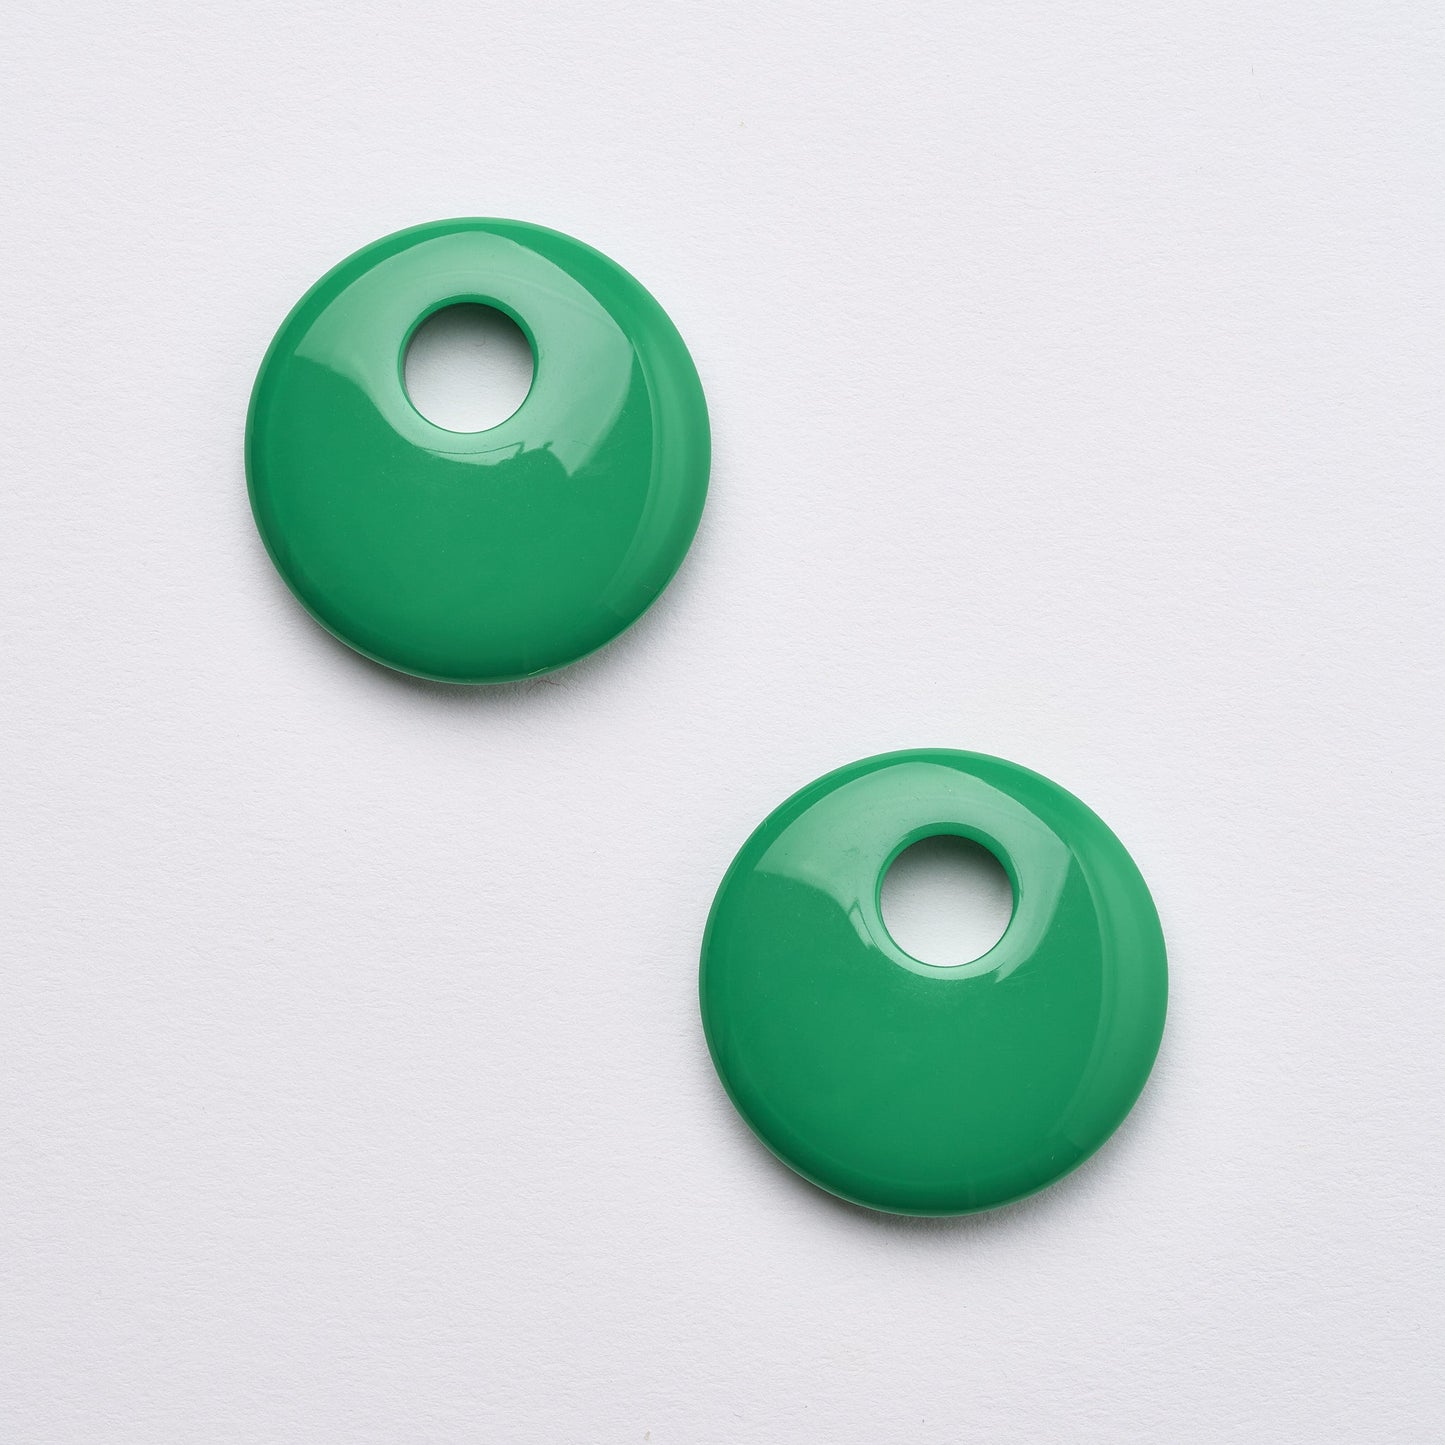 Disc Earring Charms in Bright Green